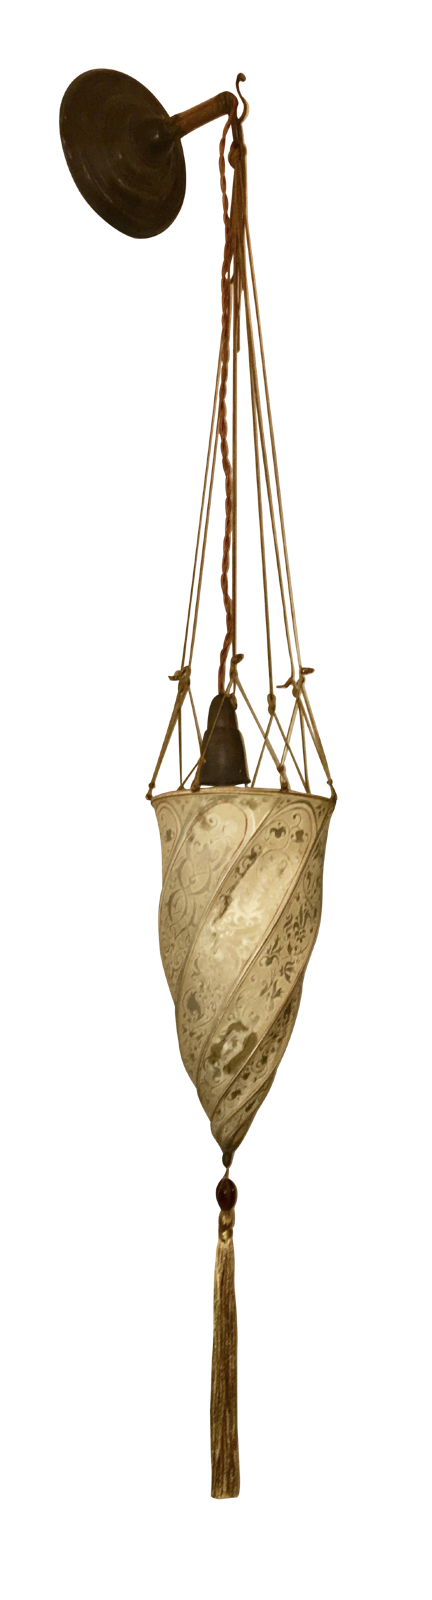 Fortuny Silk Pendant Light or Sconce - Original, Early - Helen Storey Antiques